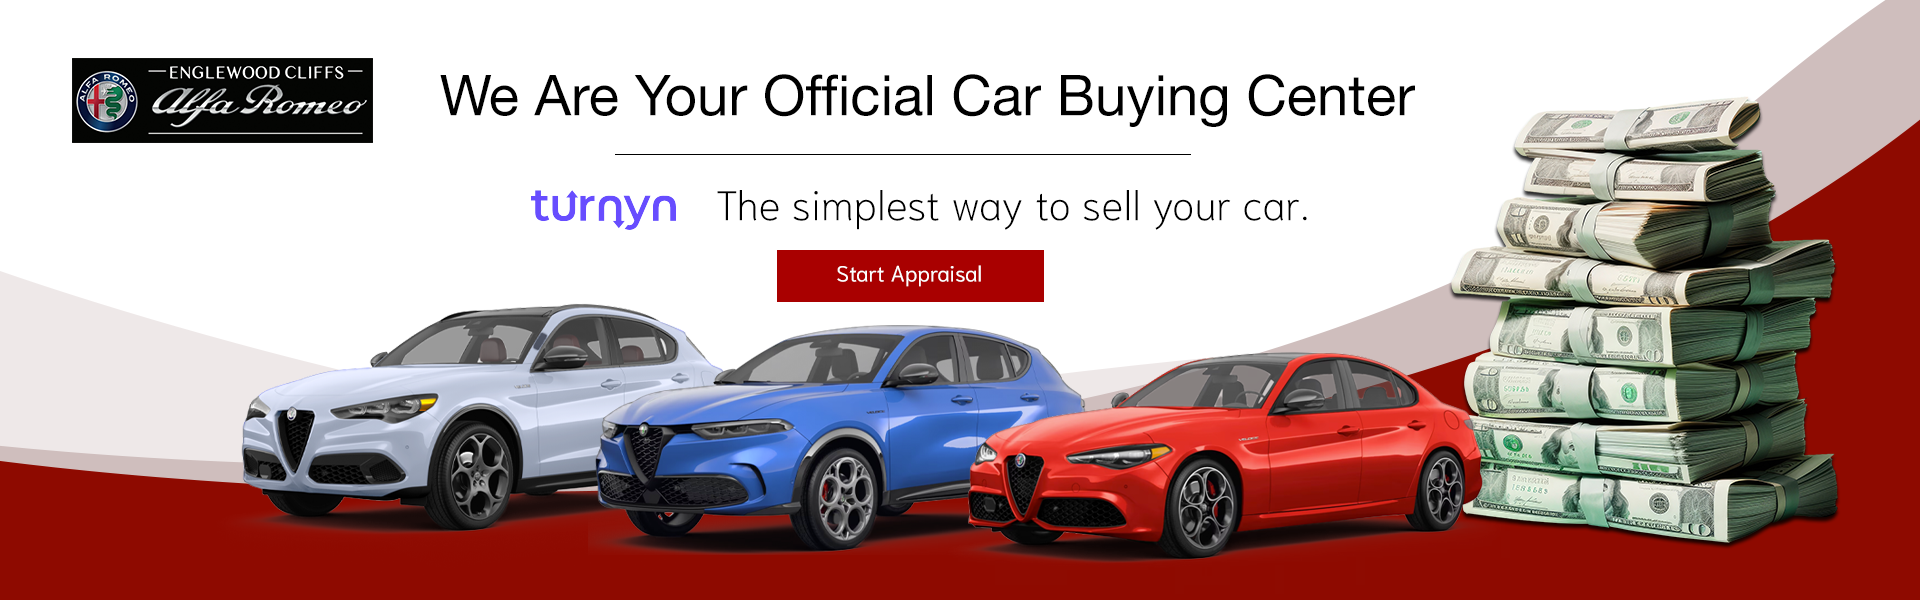 Official Buying Center 